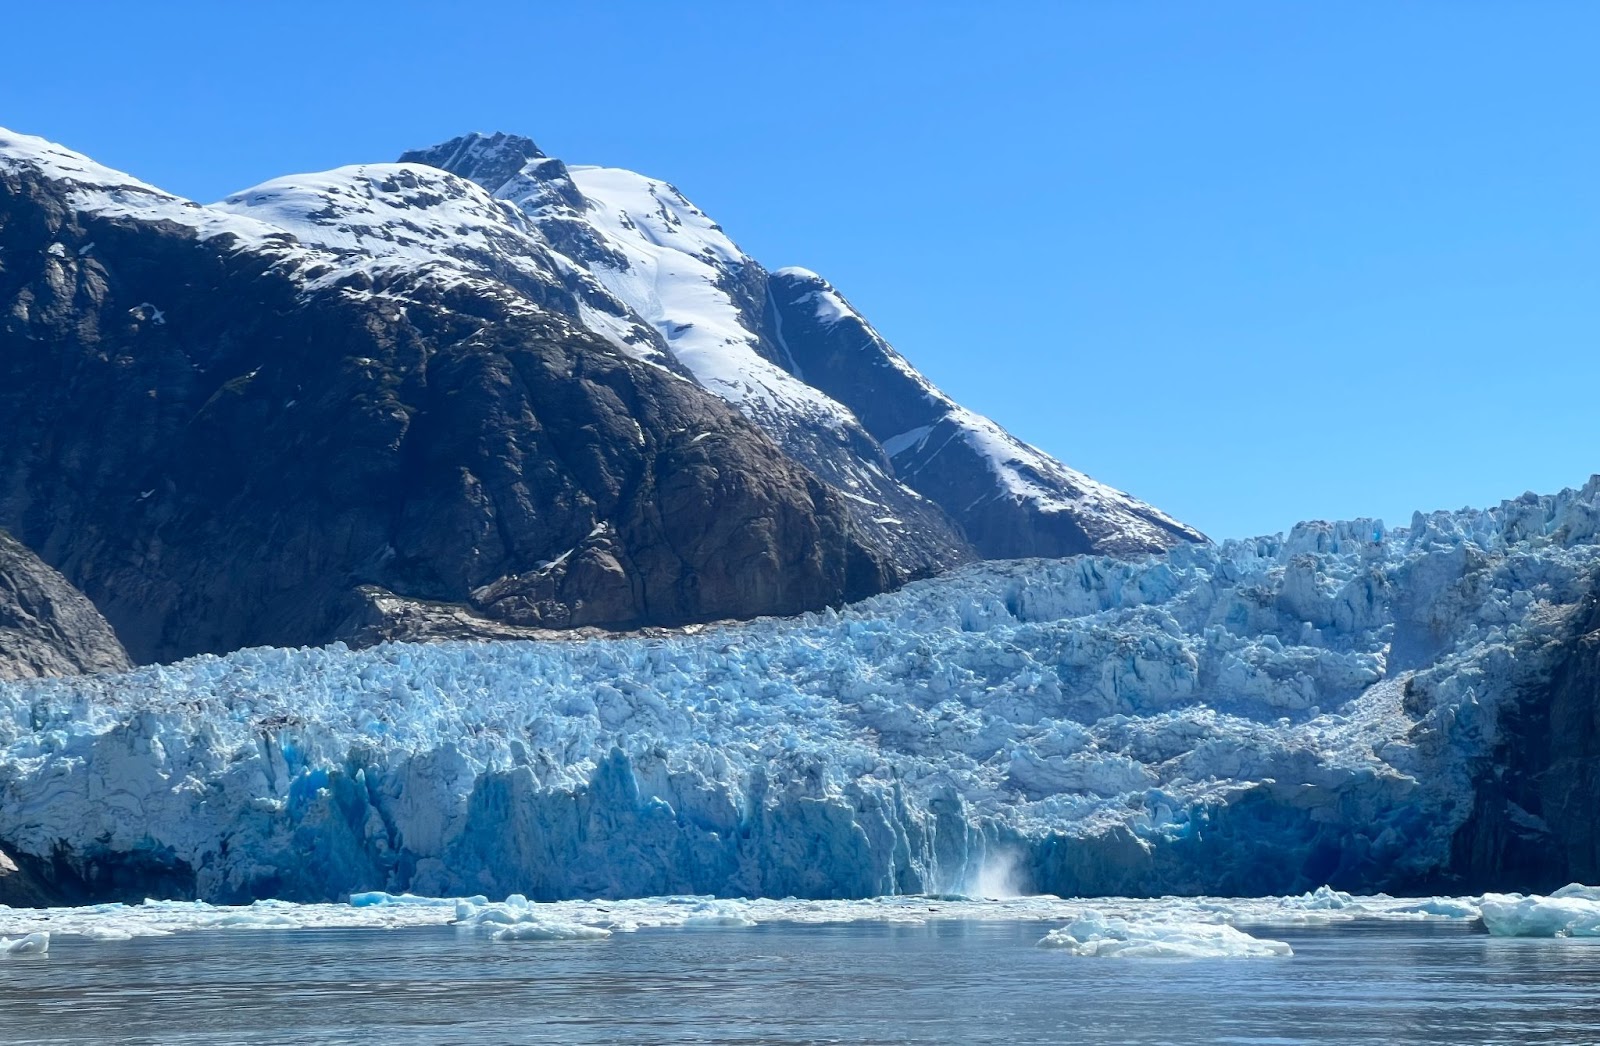 A close-up view of a glacier from the water, looking up at the steep, rocky valley left in its wake.